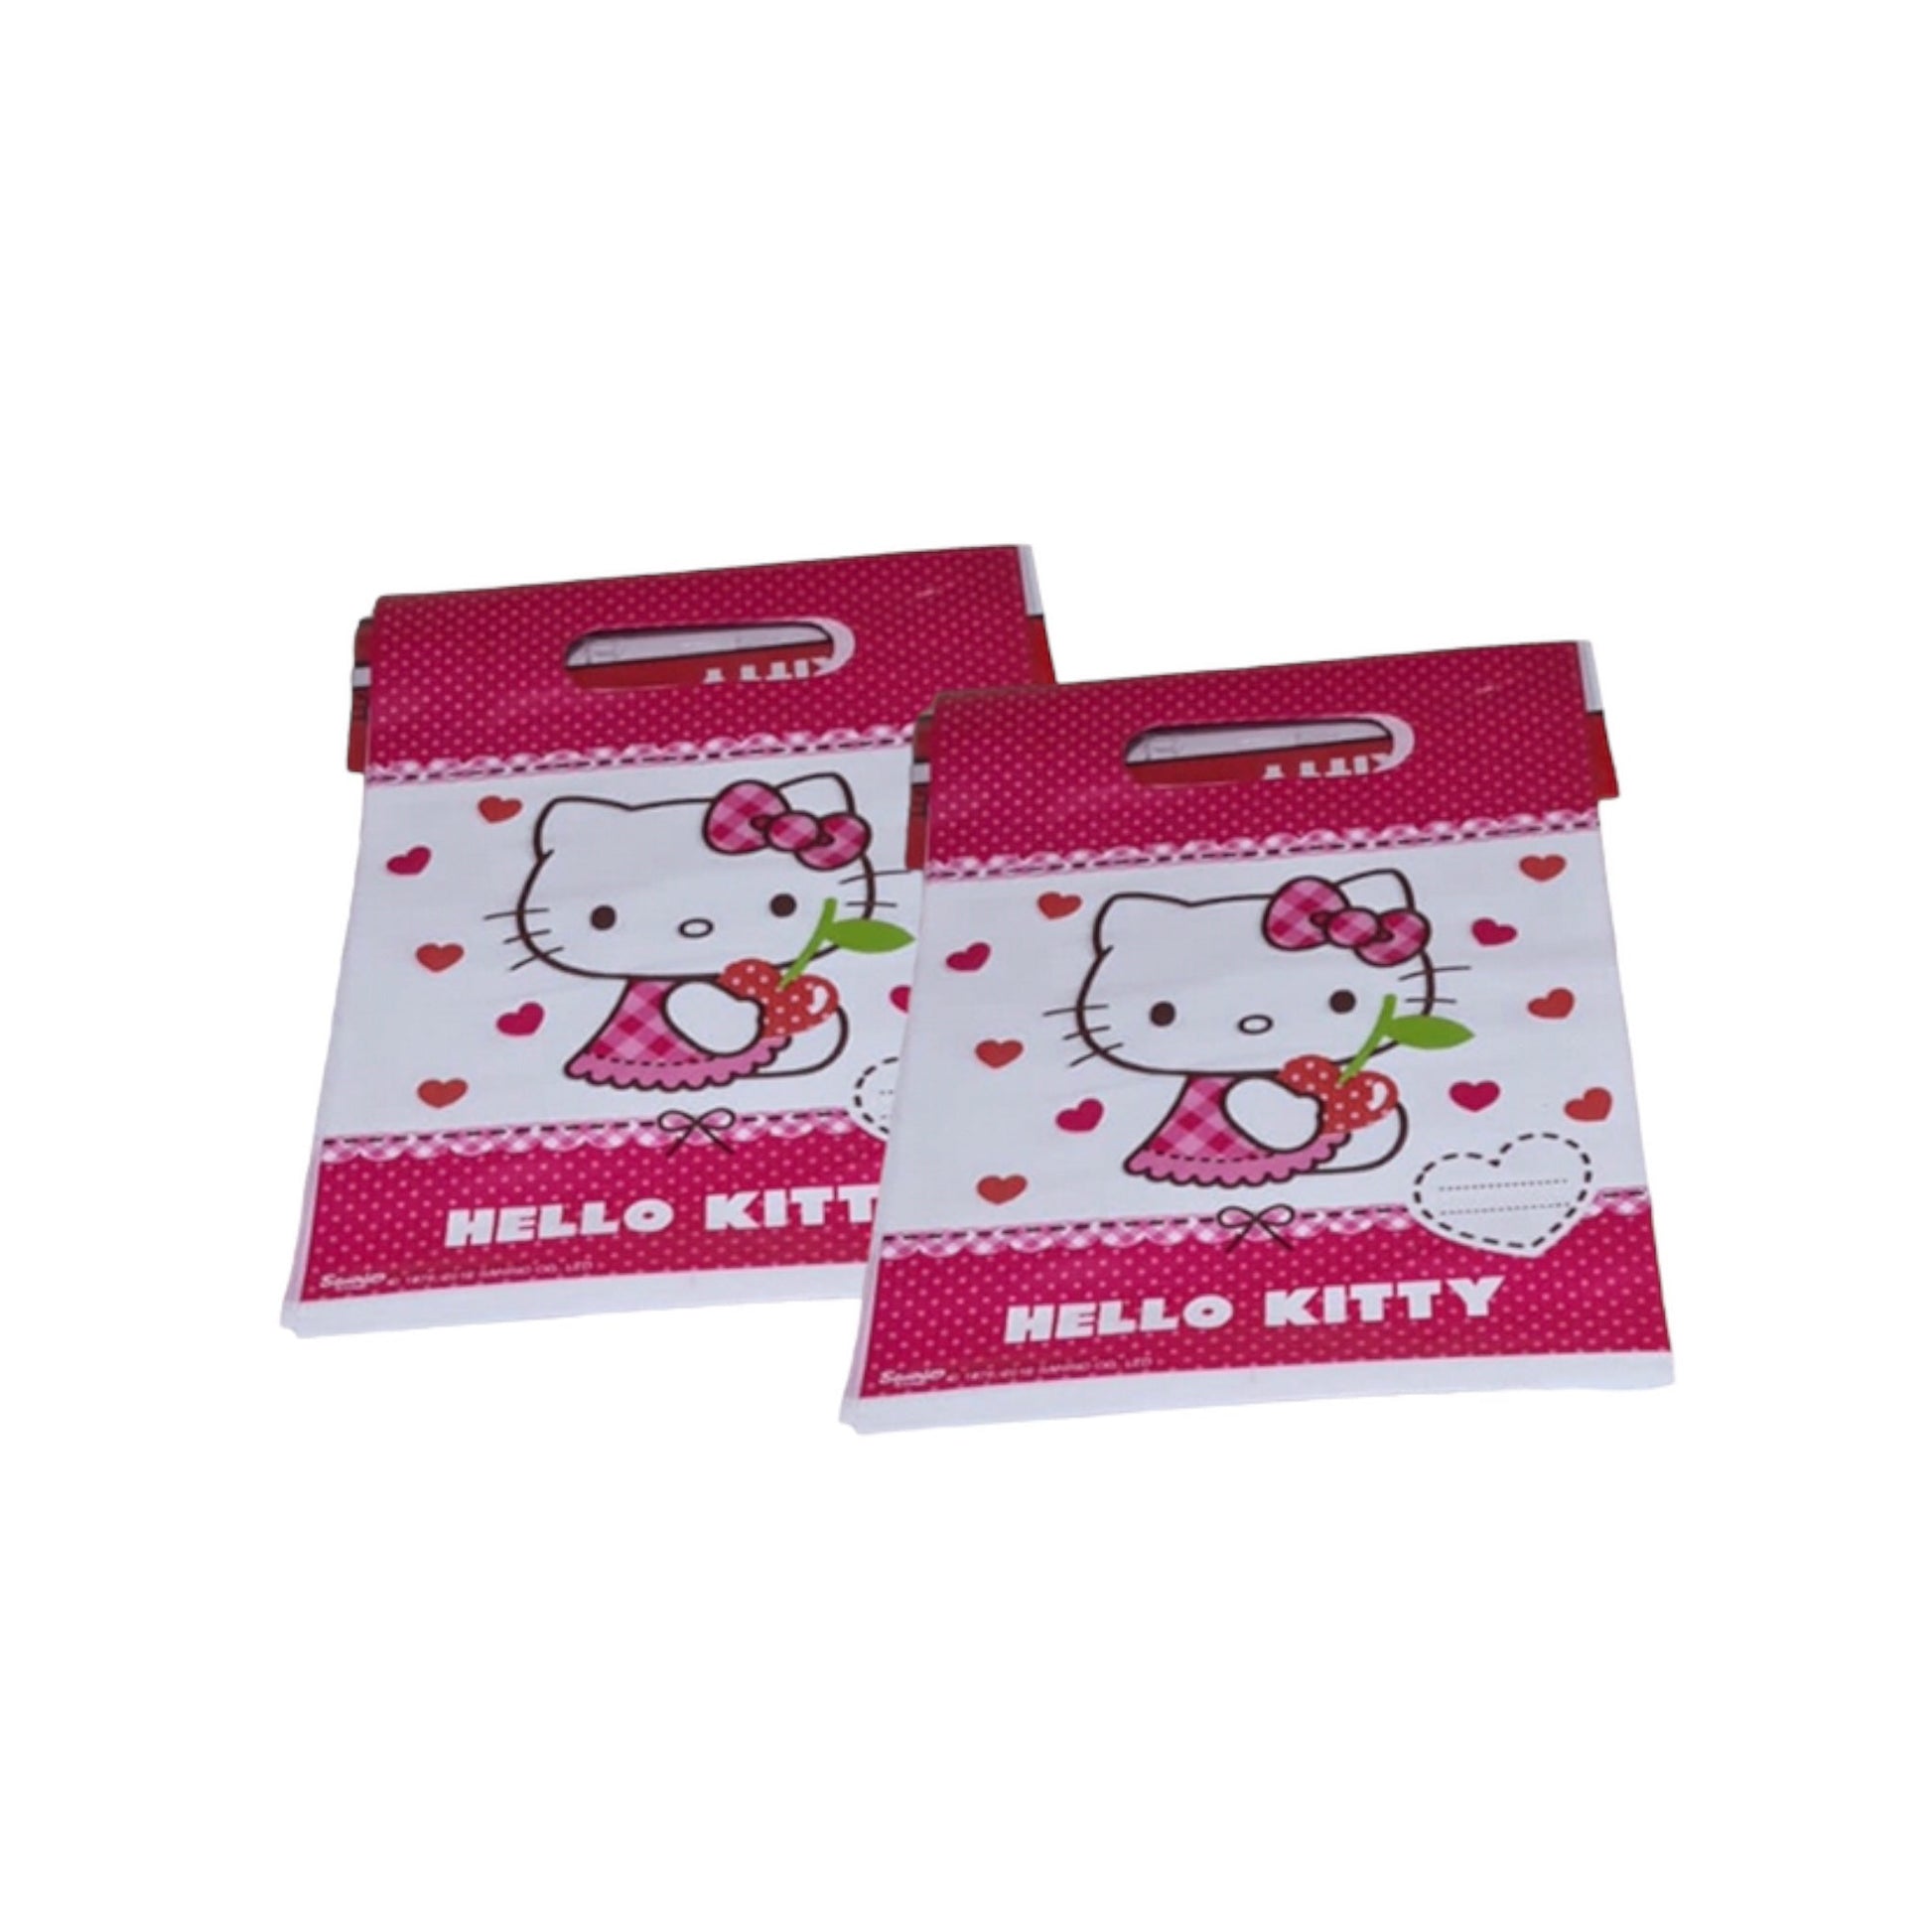 Party loot Bags -Hello Kitty V&N Goodies Galore